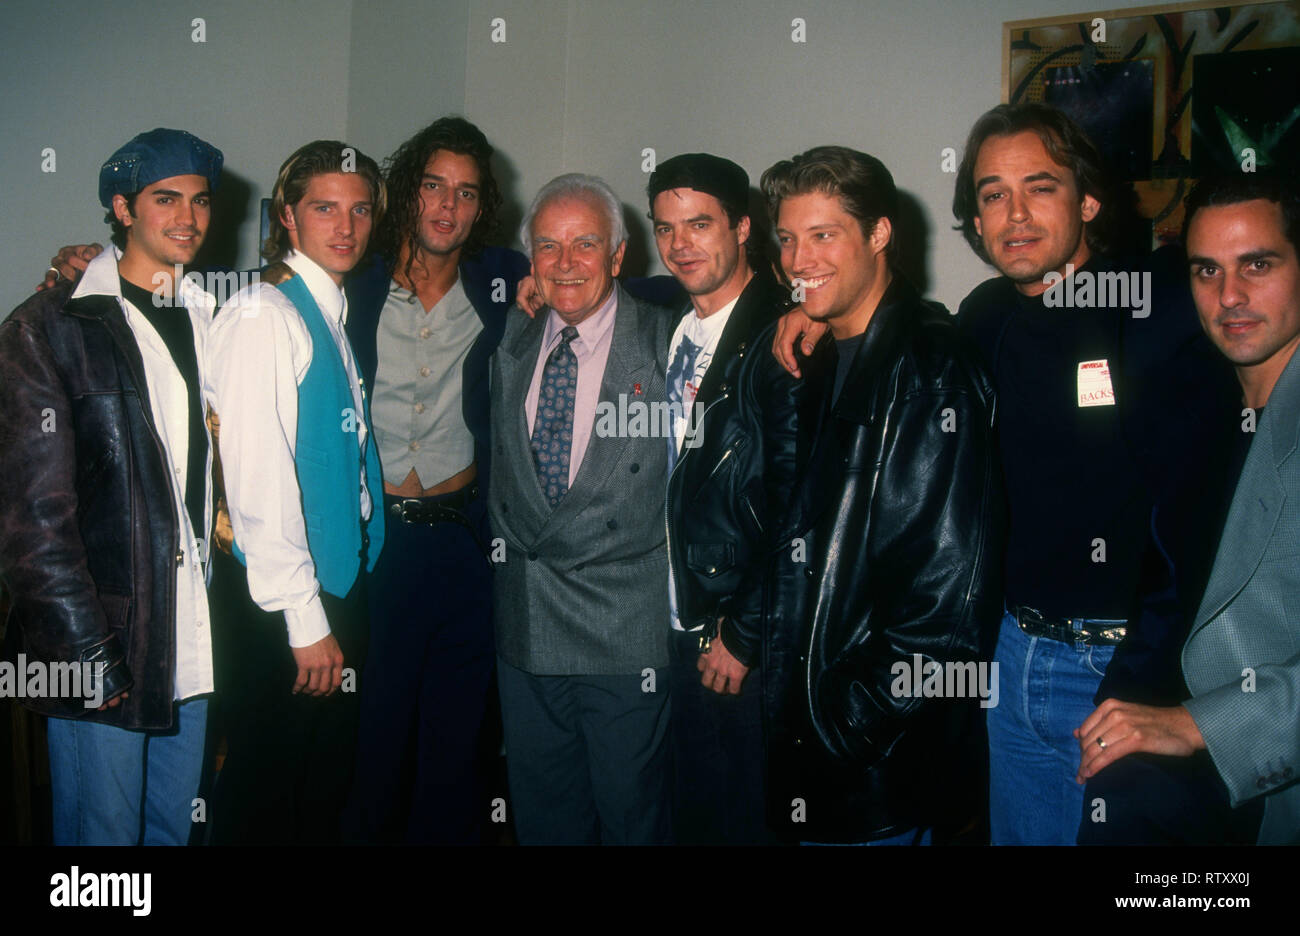 UNIVERSAL CITY, CA - FEBRUARY 6: (EXCLUSIVE) Actor Michael Sutton, actor  Steve Burton, Singer/actor Ricky Martin, guest, actor Wally Kurth, actor  Sean Kanan, actor Jon Lindstrom and actor Maurice Benard pose backstage